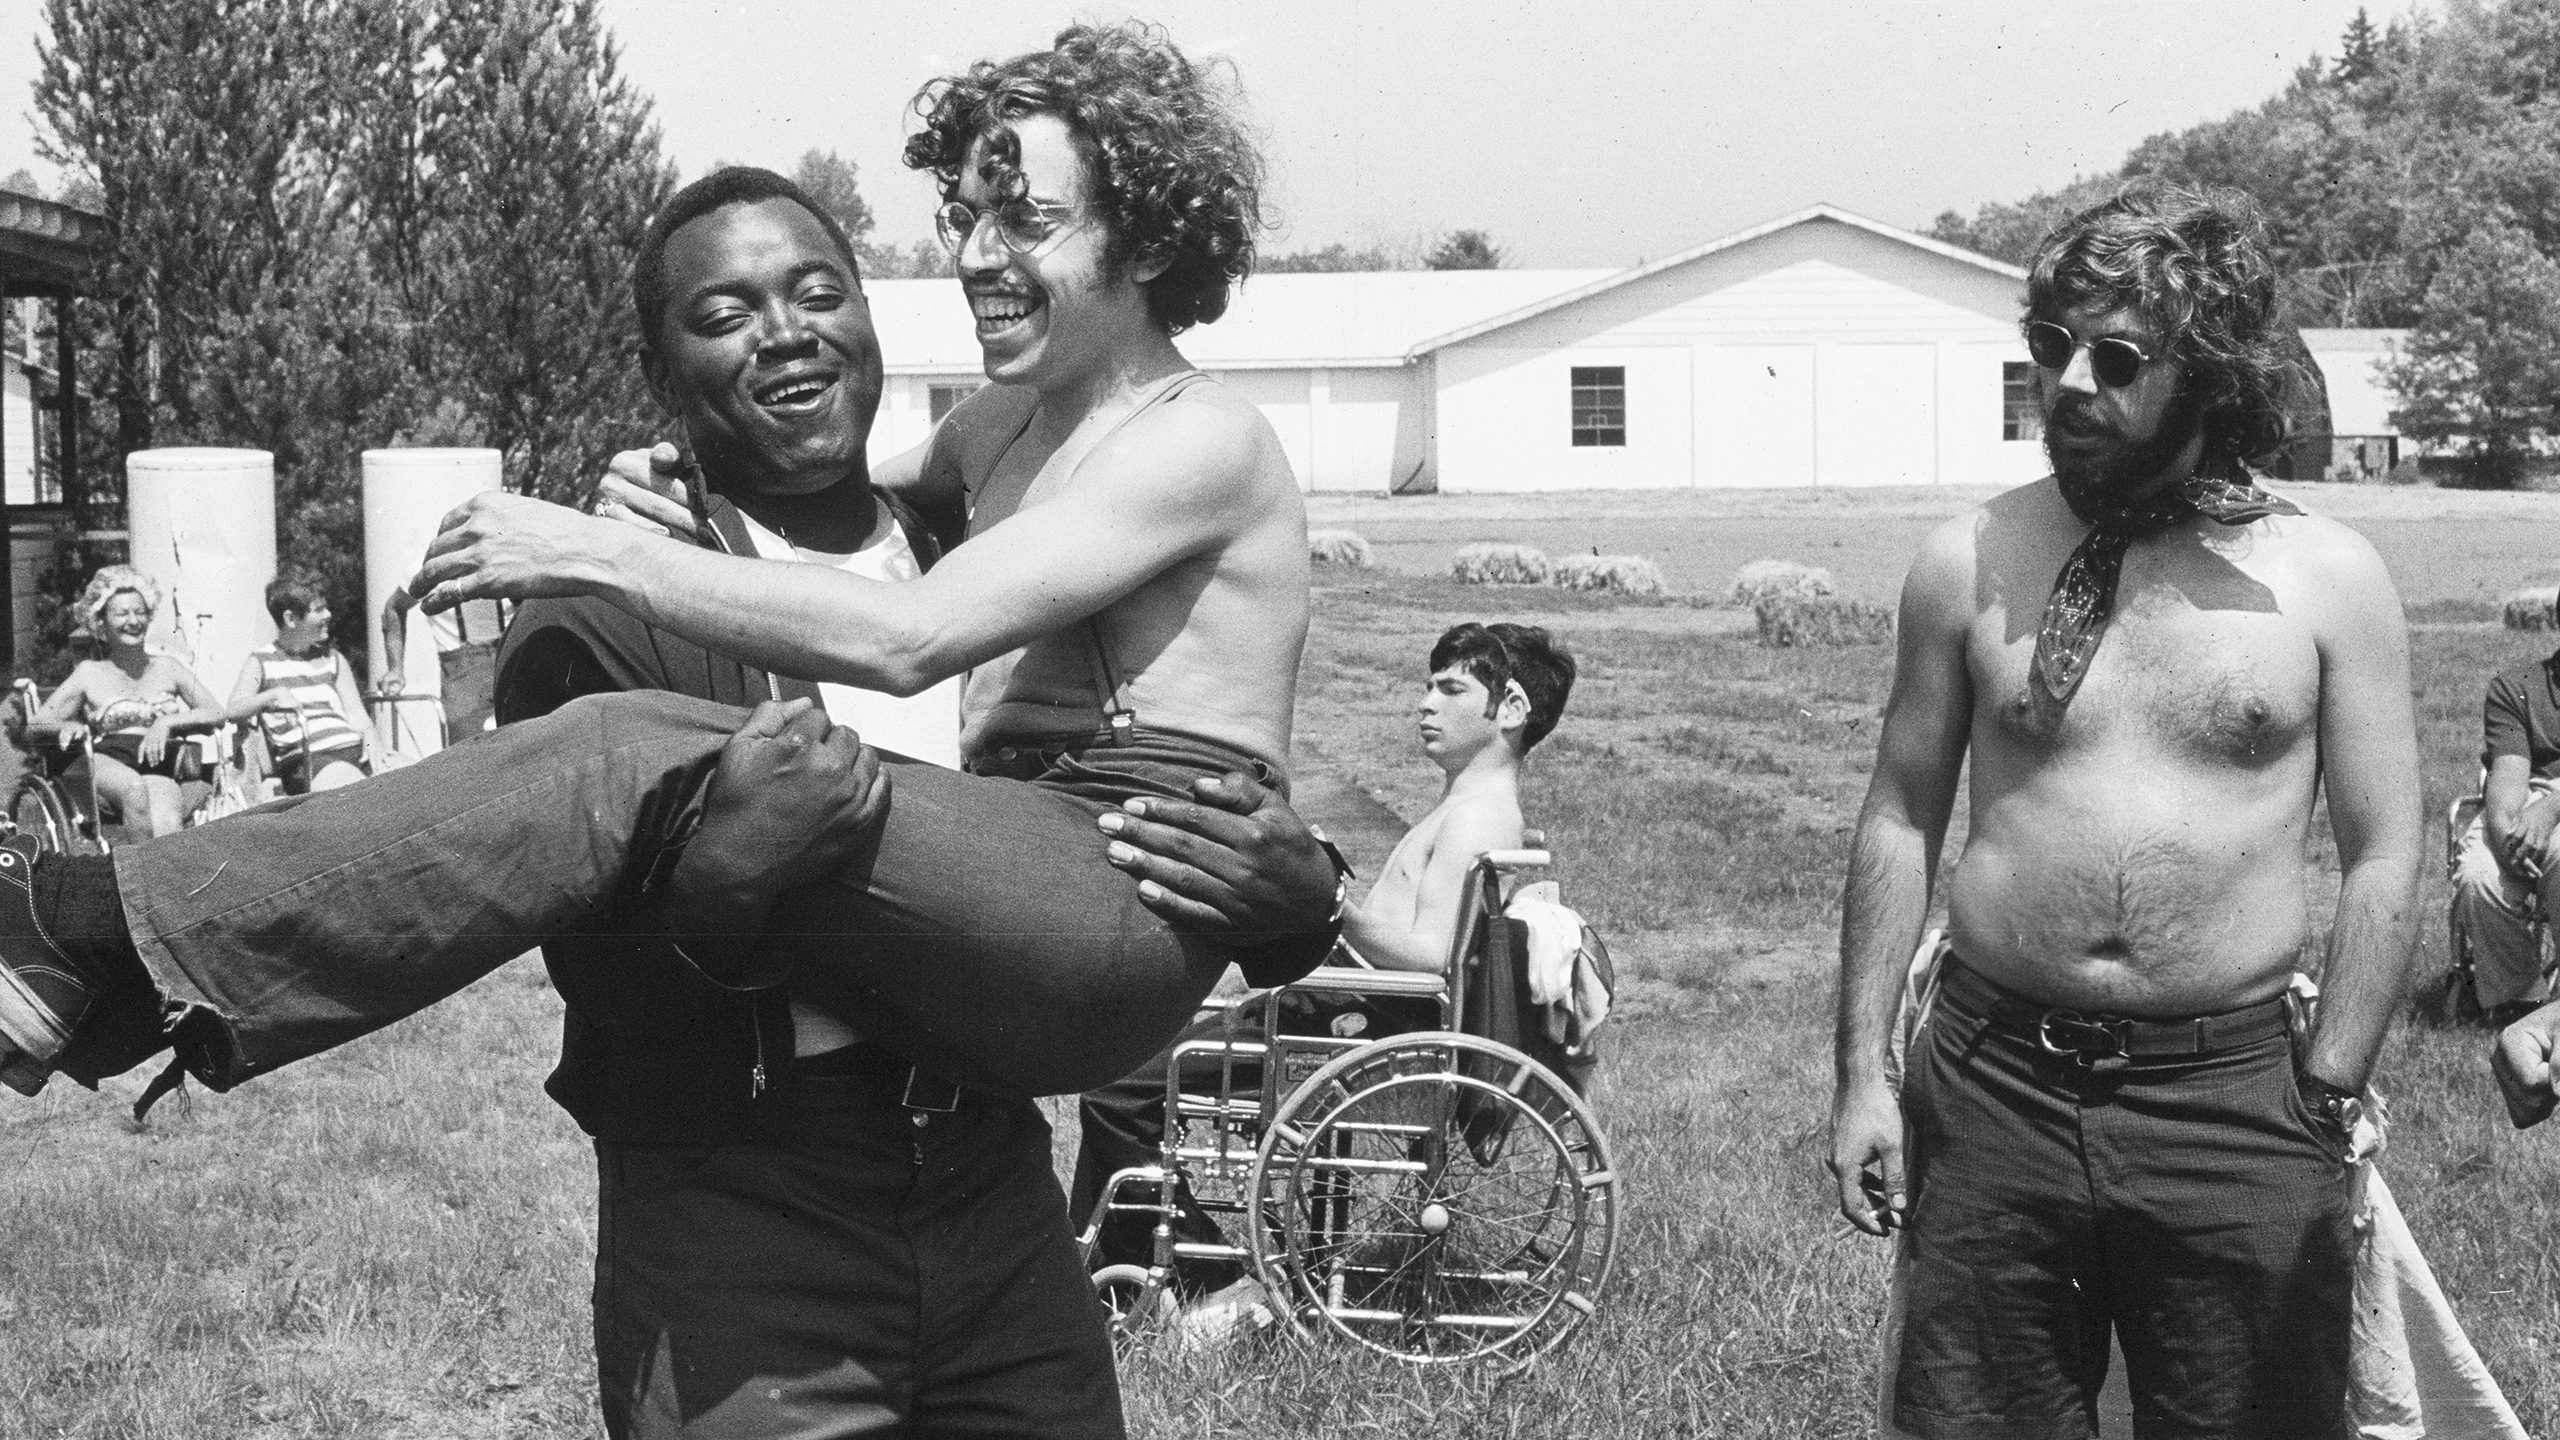 Black and white photo of a person carrying another person in the sunny outdoors. Both are laughing. A man wearing no shirt and a neck scarf looks at them. Several people in wheelchairs relax in the background.